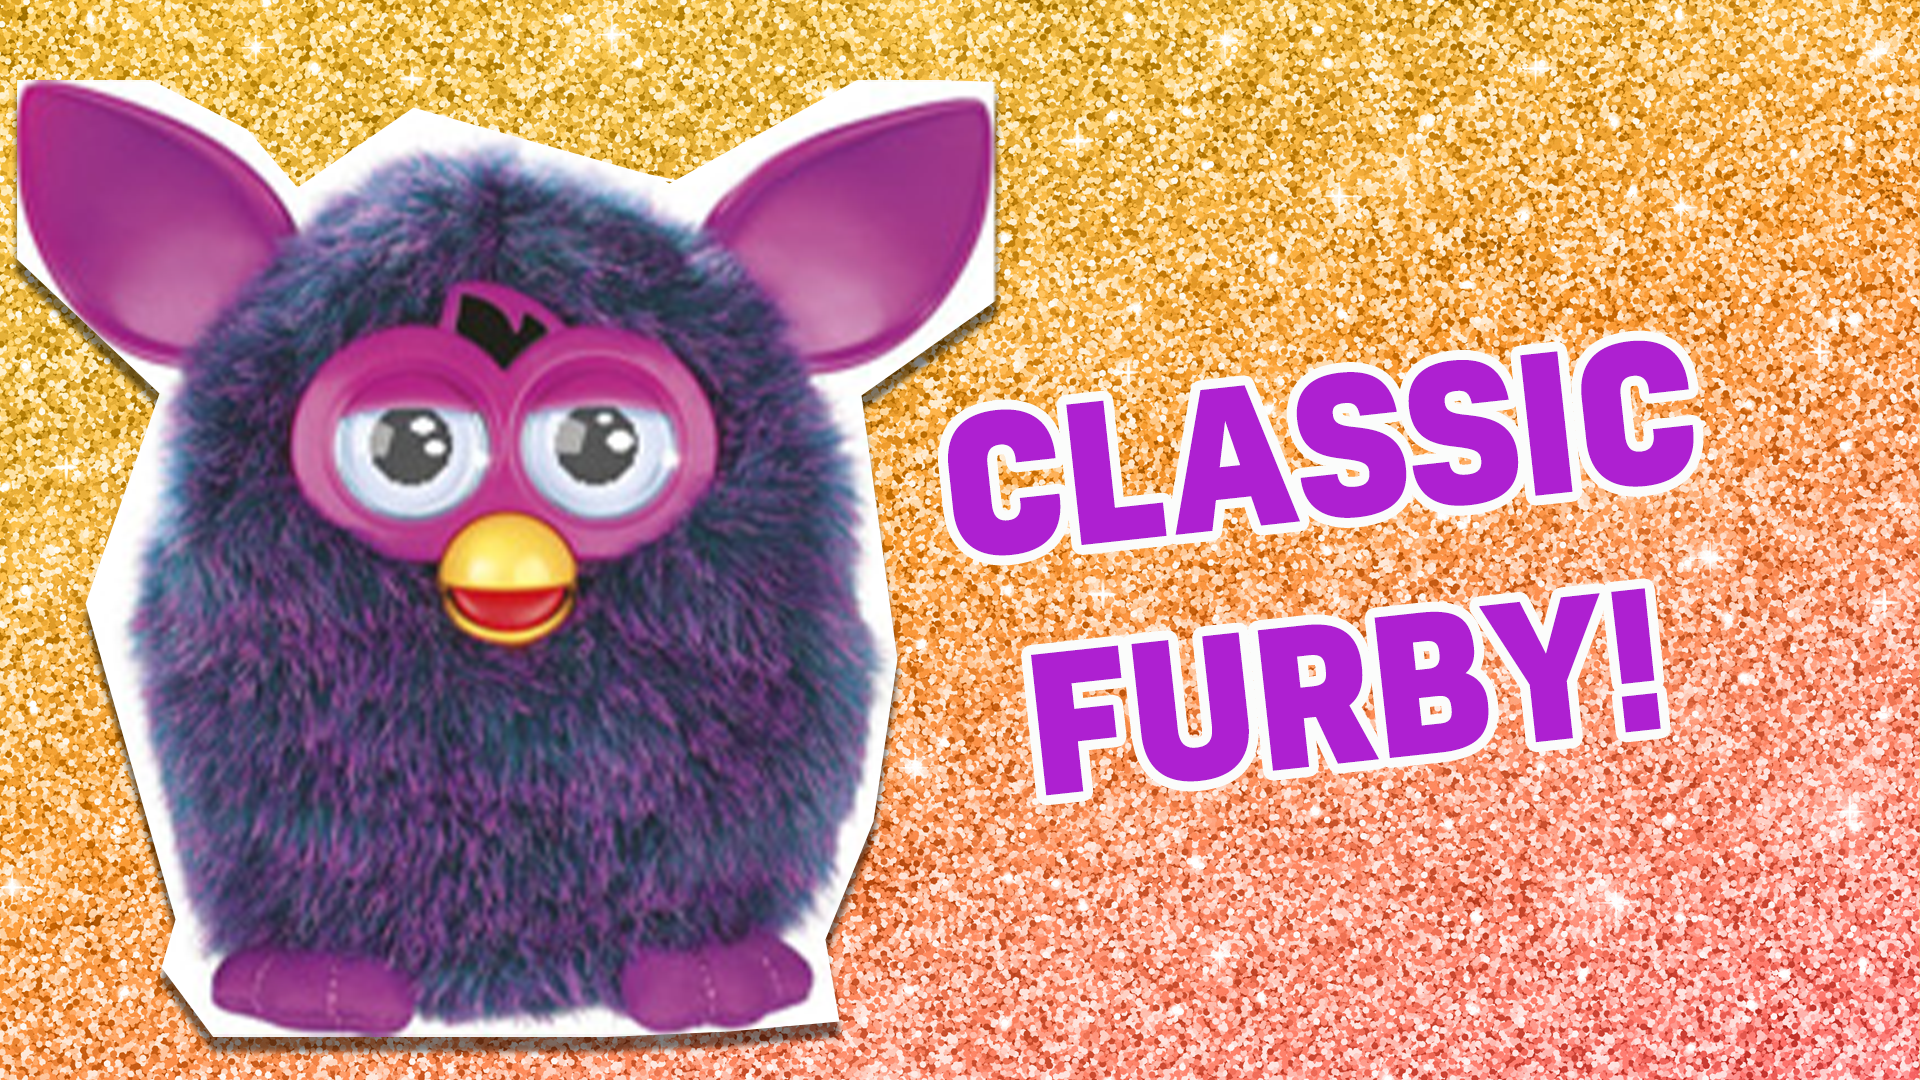 You're the original Furby, the 90s classic! You may not be the most hi-tech toy out there, but no one can beat your nostalgia value!